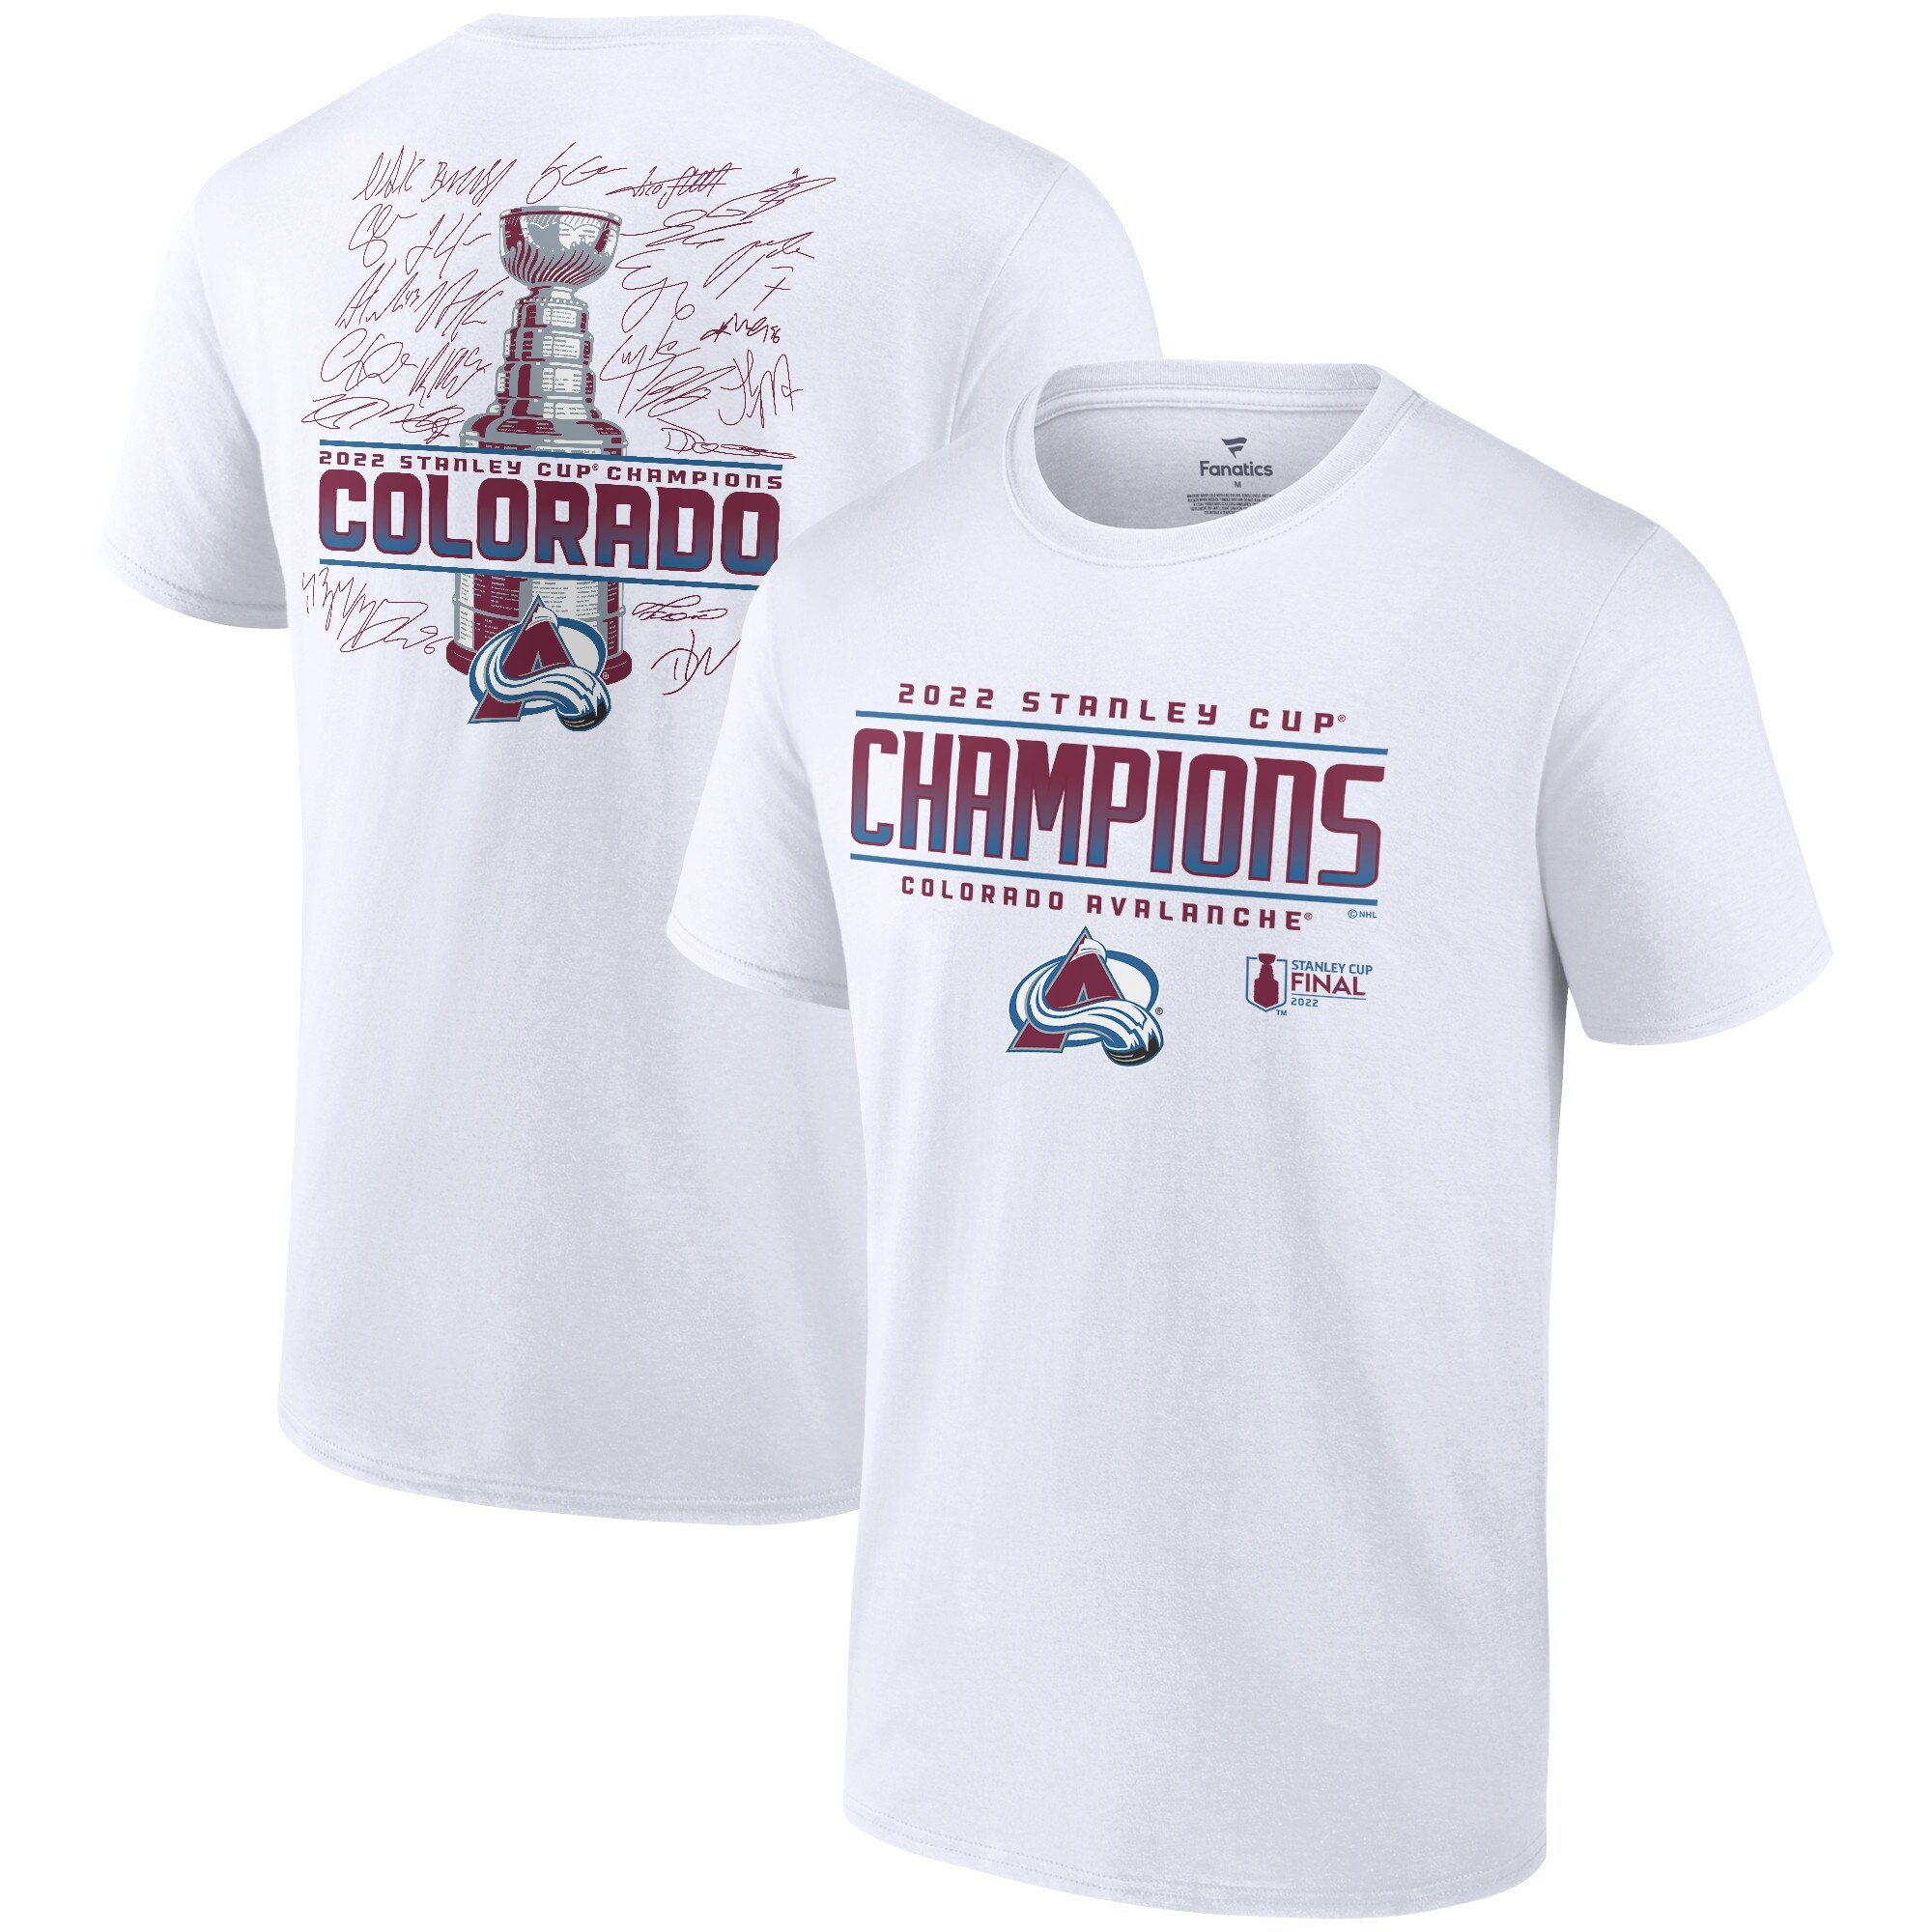 Men's Fanatics Branded White Colorado Avalanche 2022 Stanley Cup Champions Signature Roster T-Shirt - image 1 of 5